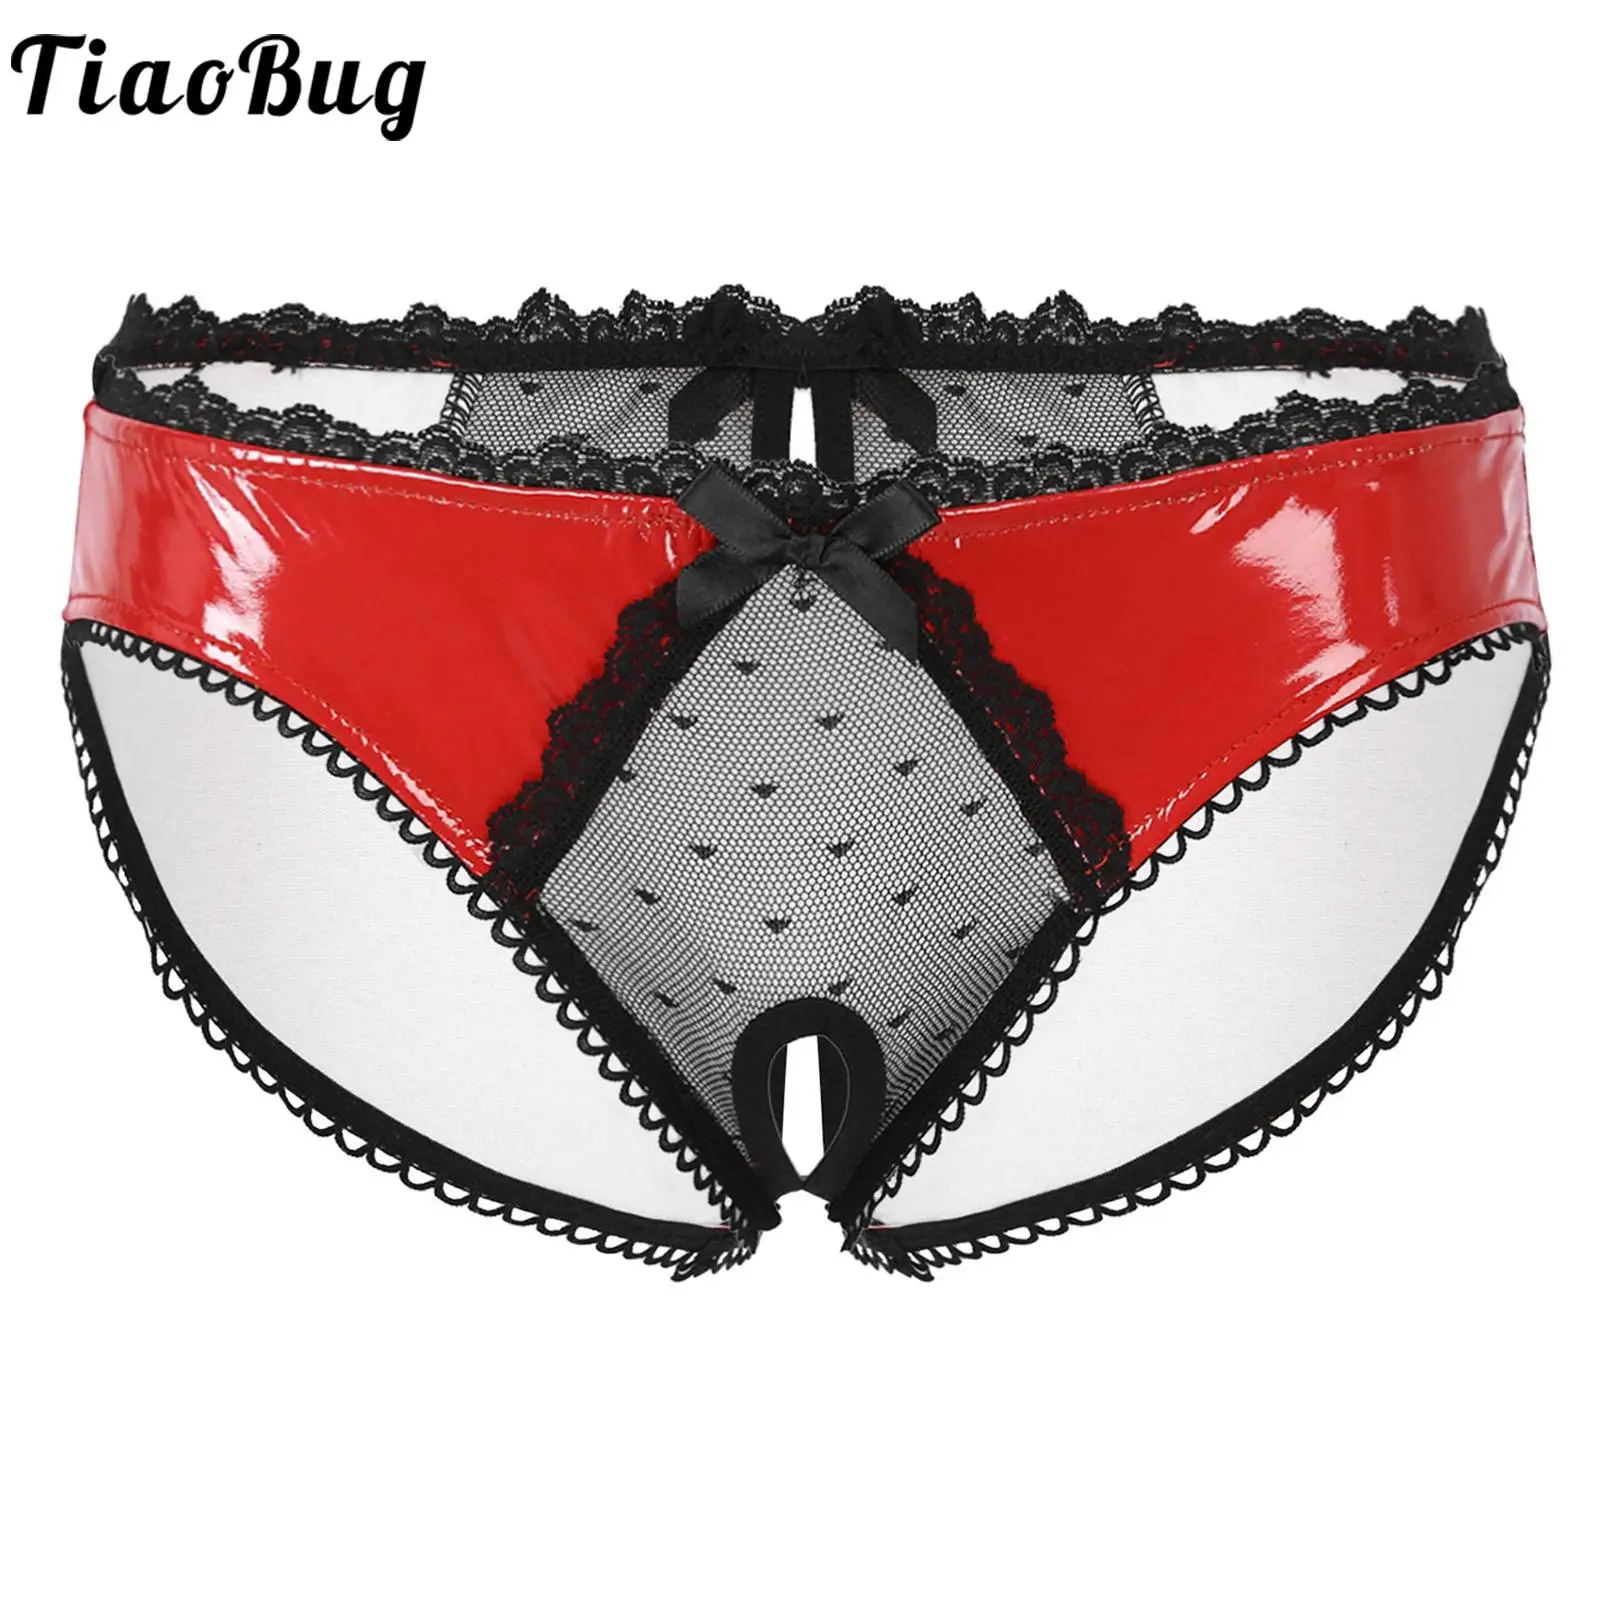 

Mens Sheer Lace Open Crotch Briefs Sissy Bowknot Glossy Patent Leather Panties Low Waist Underpants Underwear Clubwear